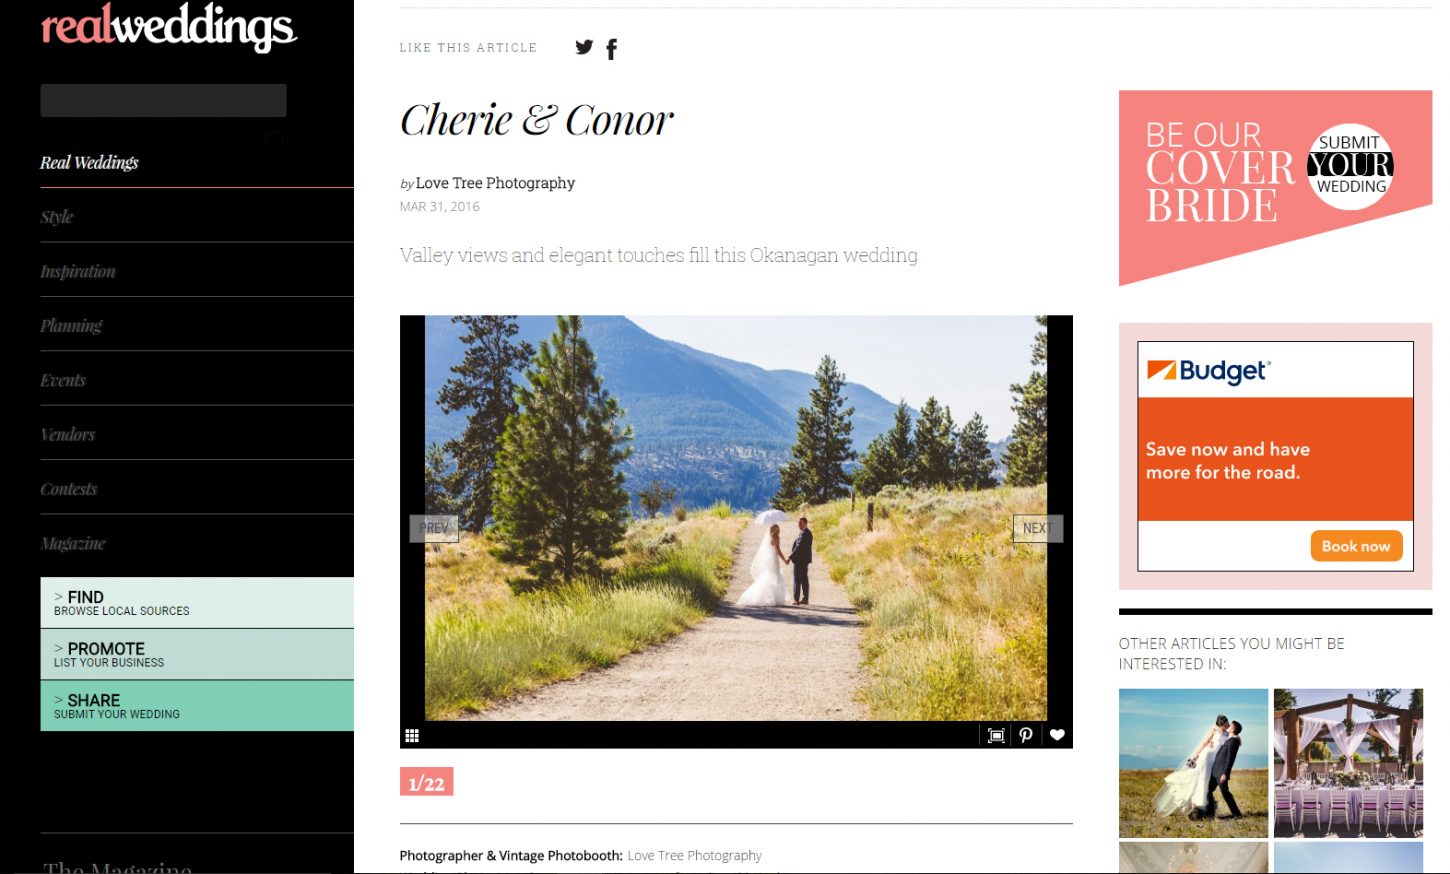 love tree photography was featured on Real Weddings Magazine, for this kelowna wedding